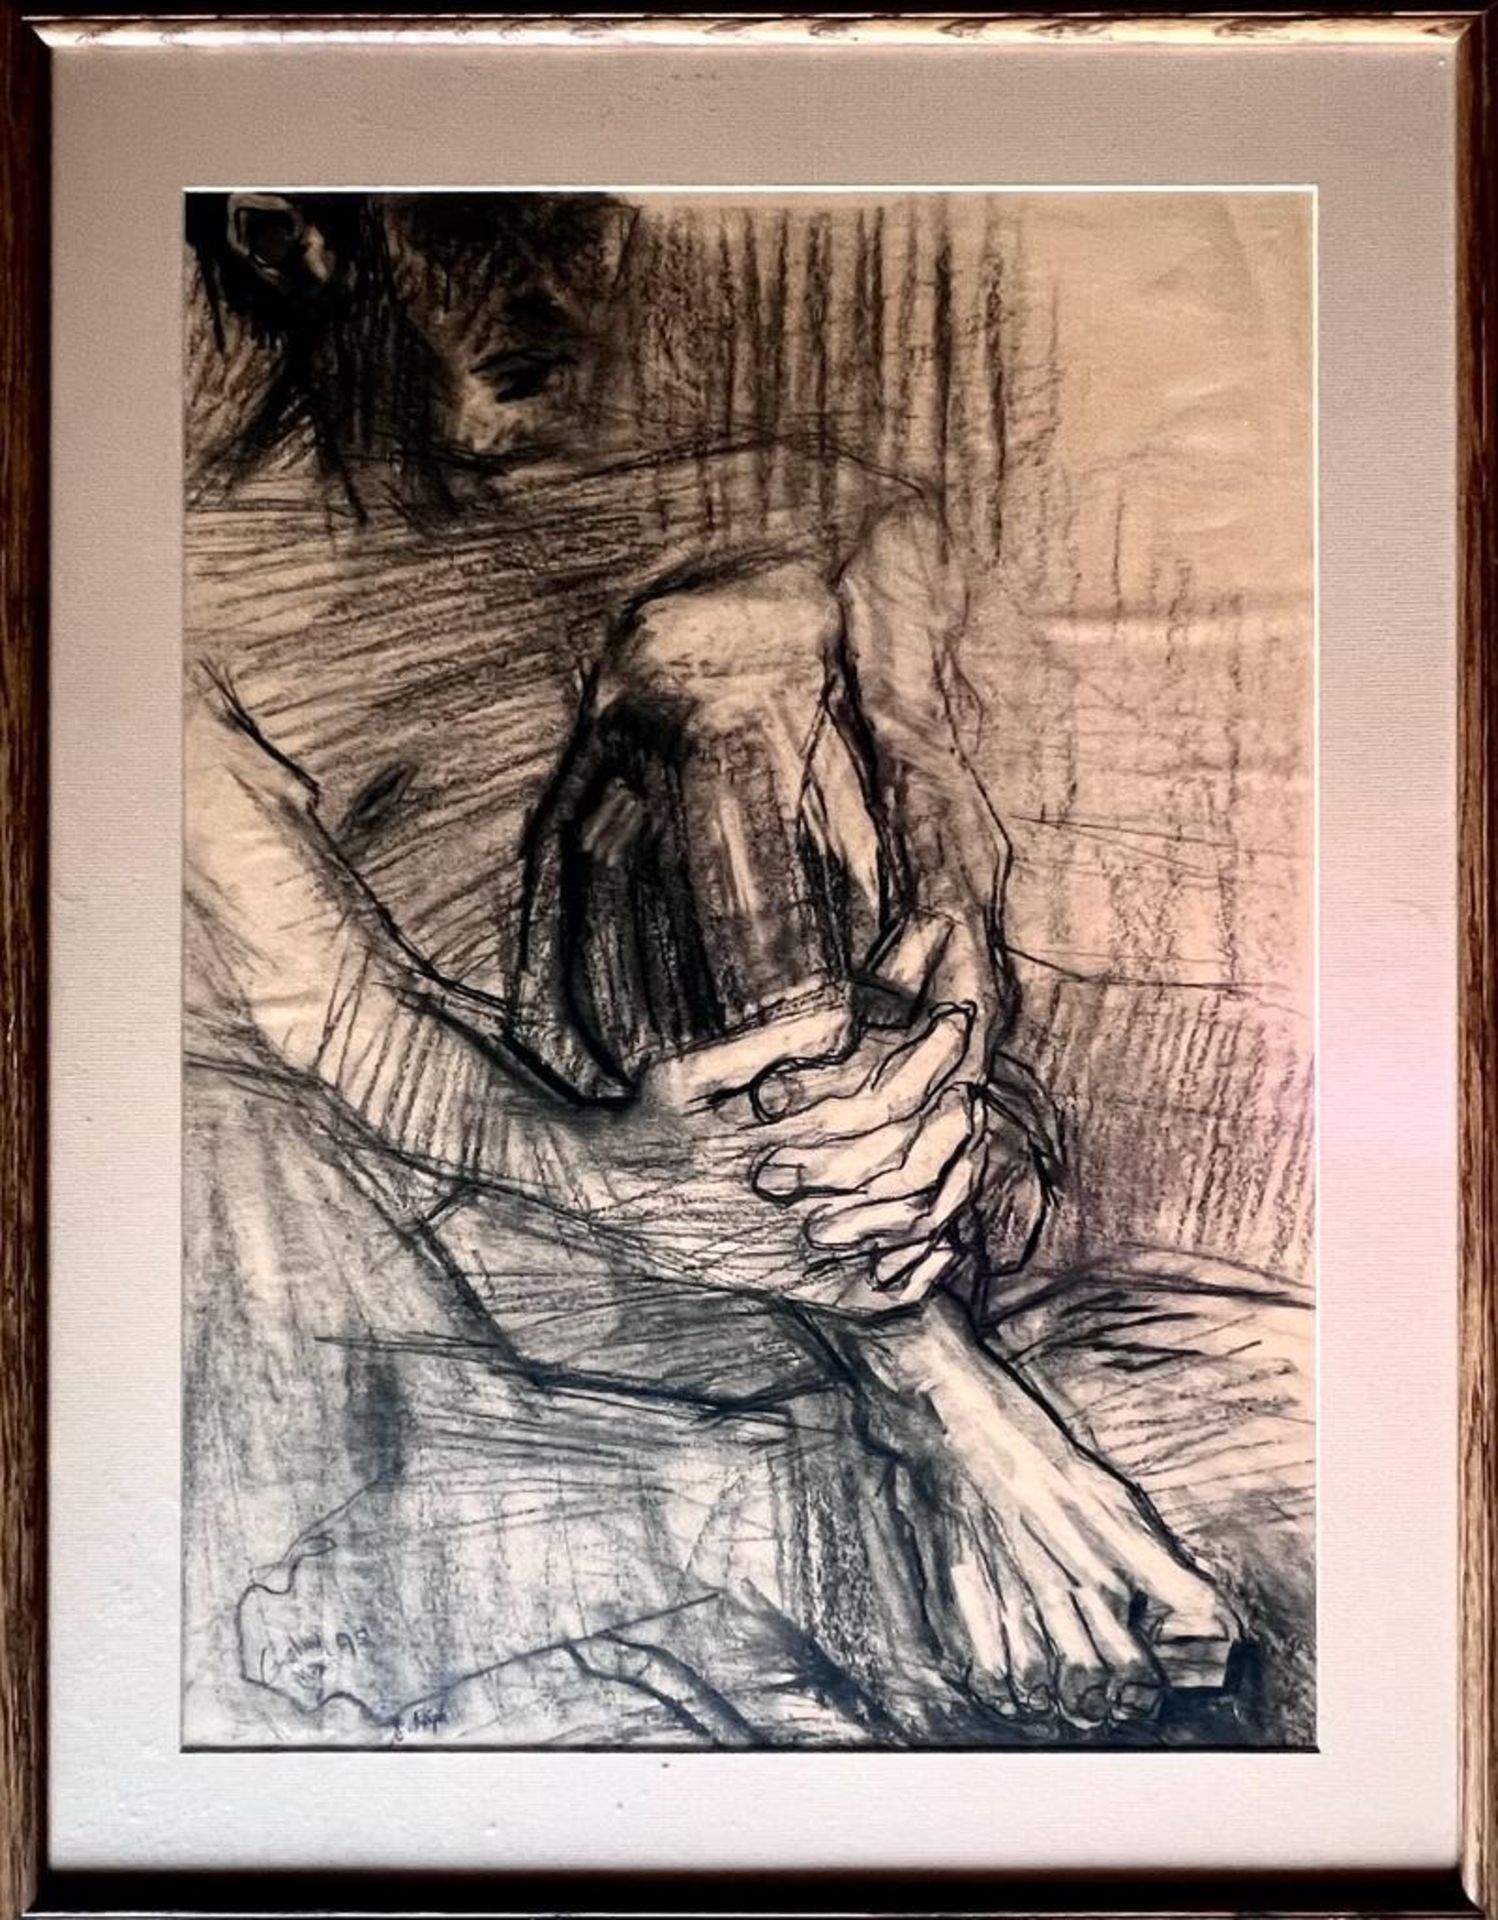 S RELPH, CHARCOAL DRAWING, SIGNED LOWER LEFT, FRAMED AND GLAZED, APPROX 74 x 54cm